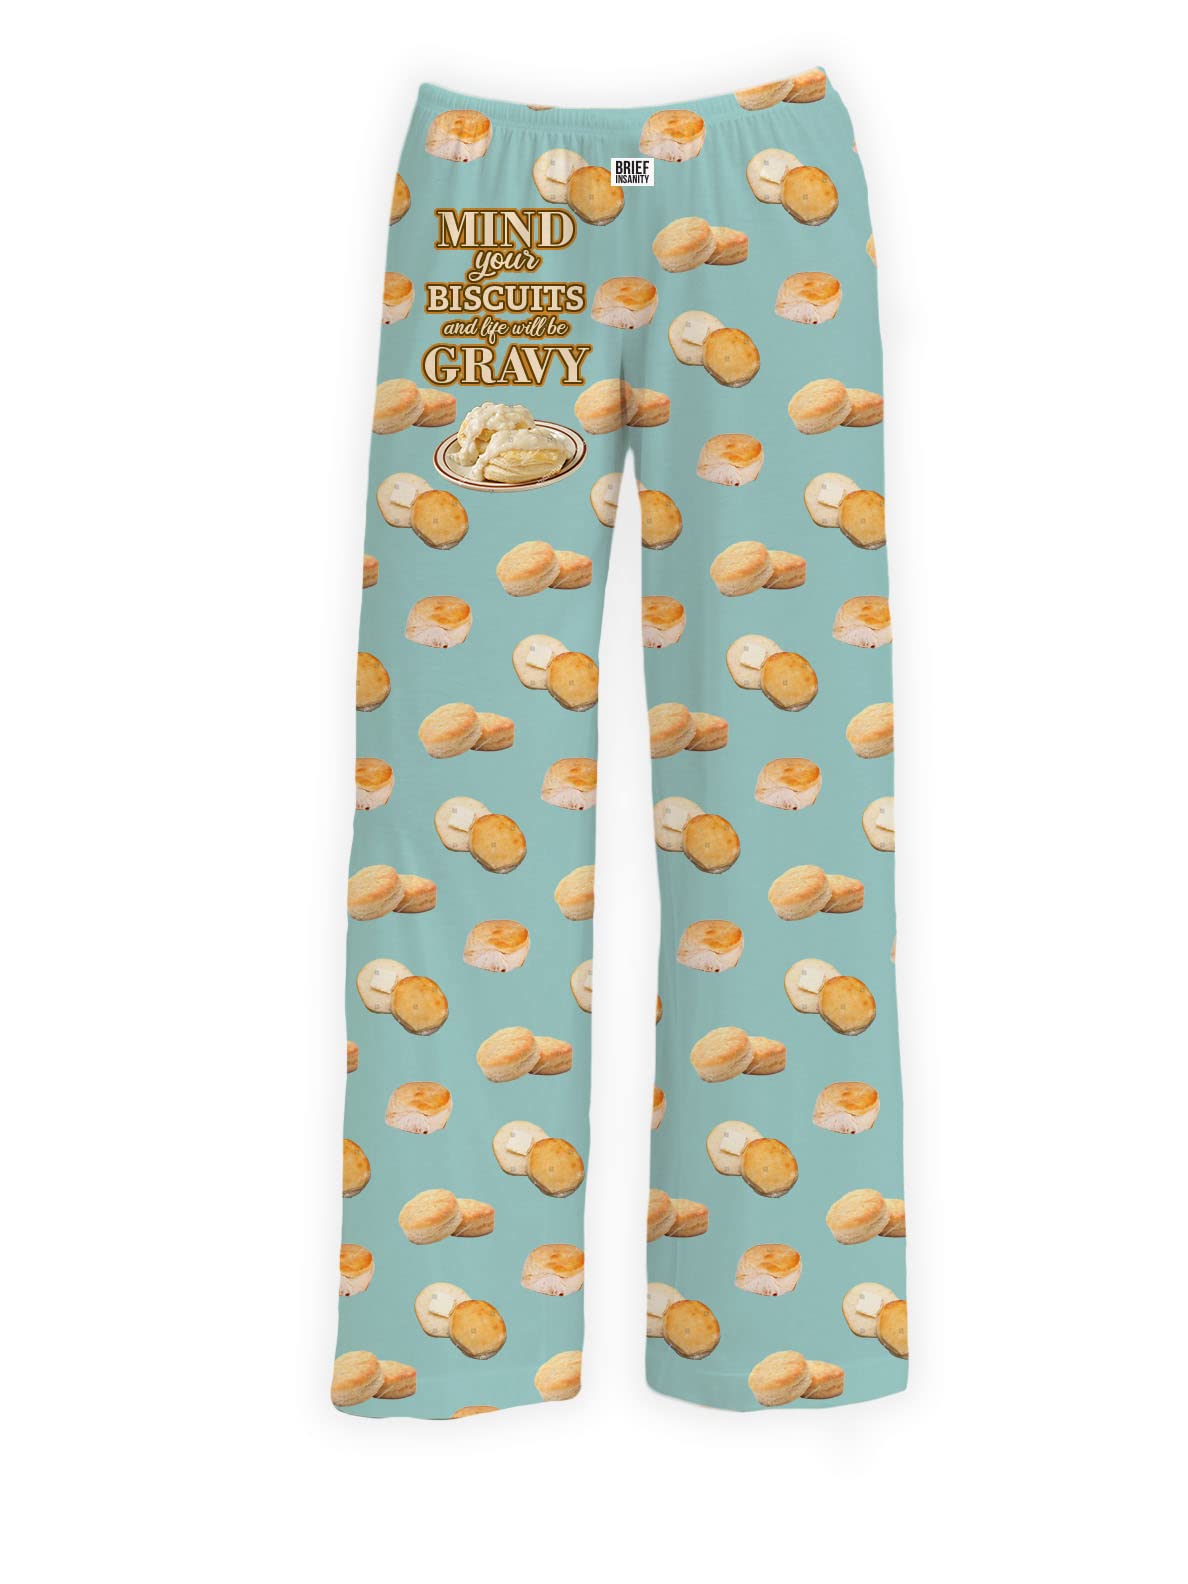 Mind Your Biscuits and Life Will Be Gravy Pajama Pants | Brief Insanity